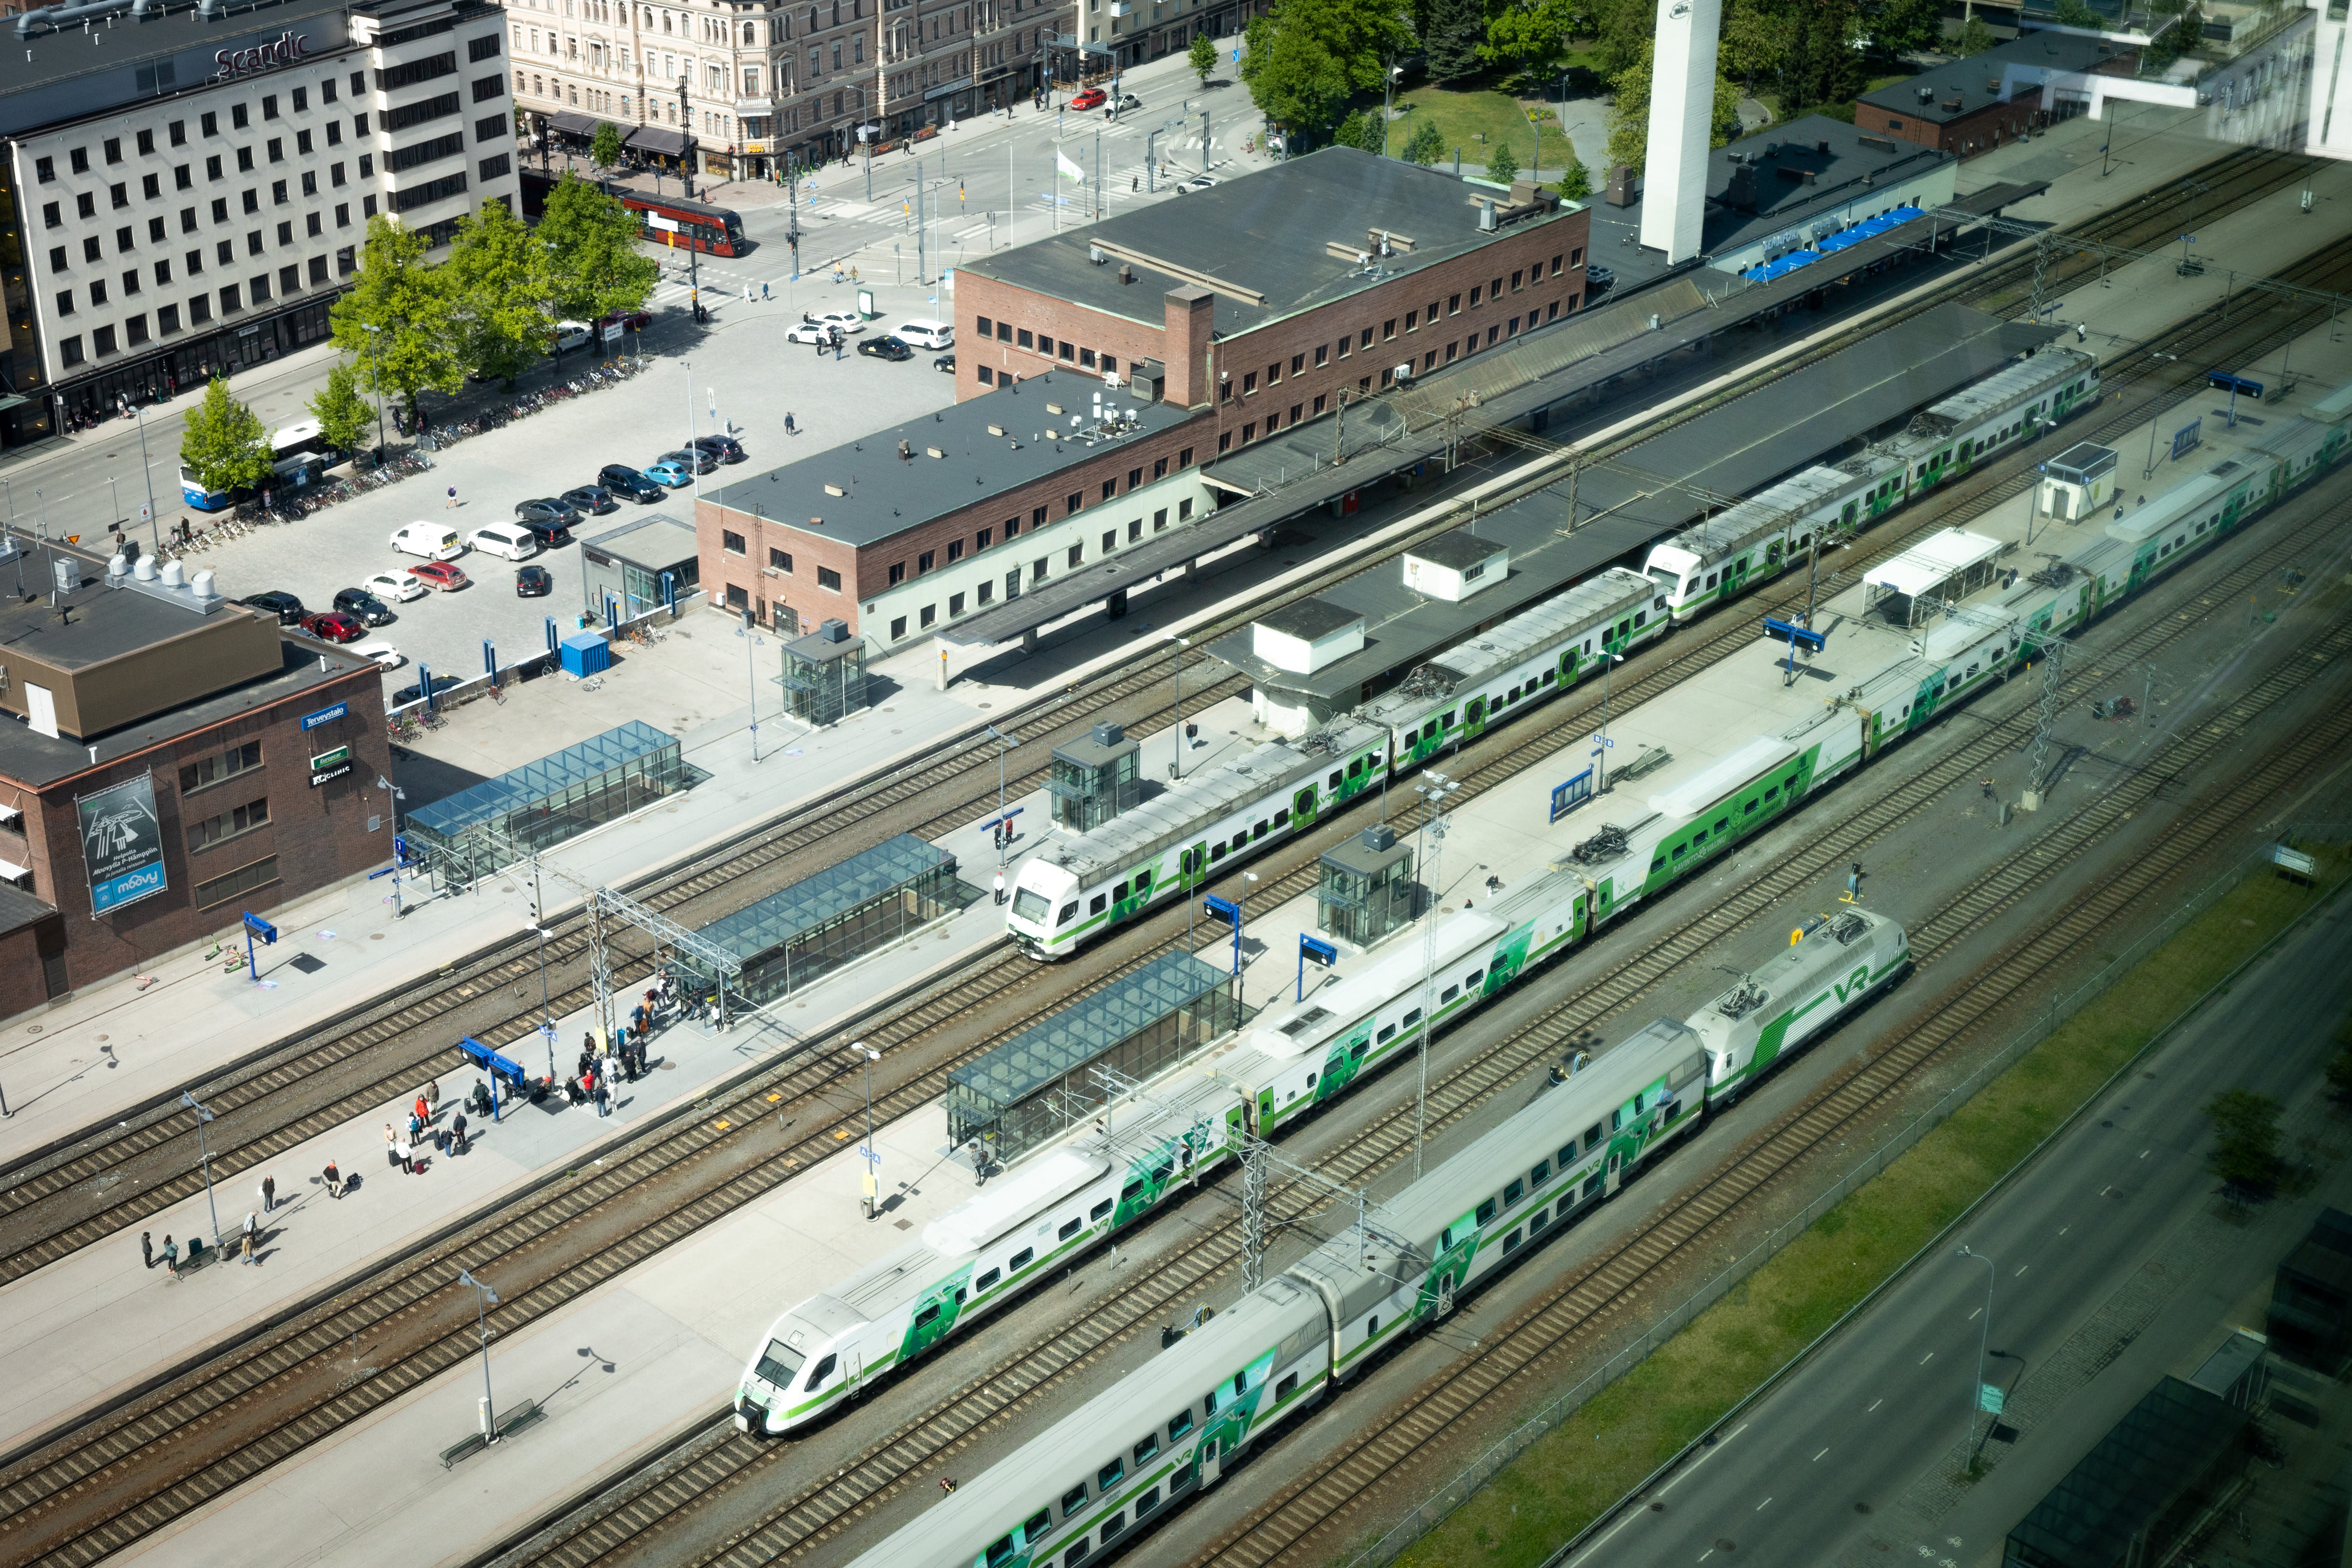 The government derailed the Tampere-Helsinki high-speed train plans